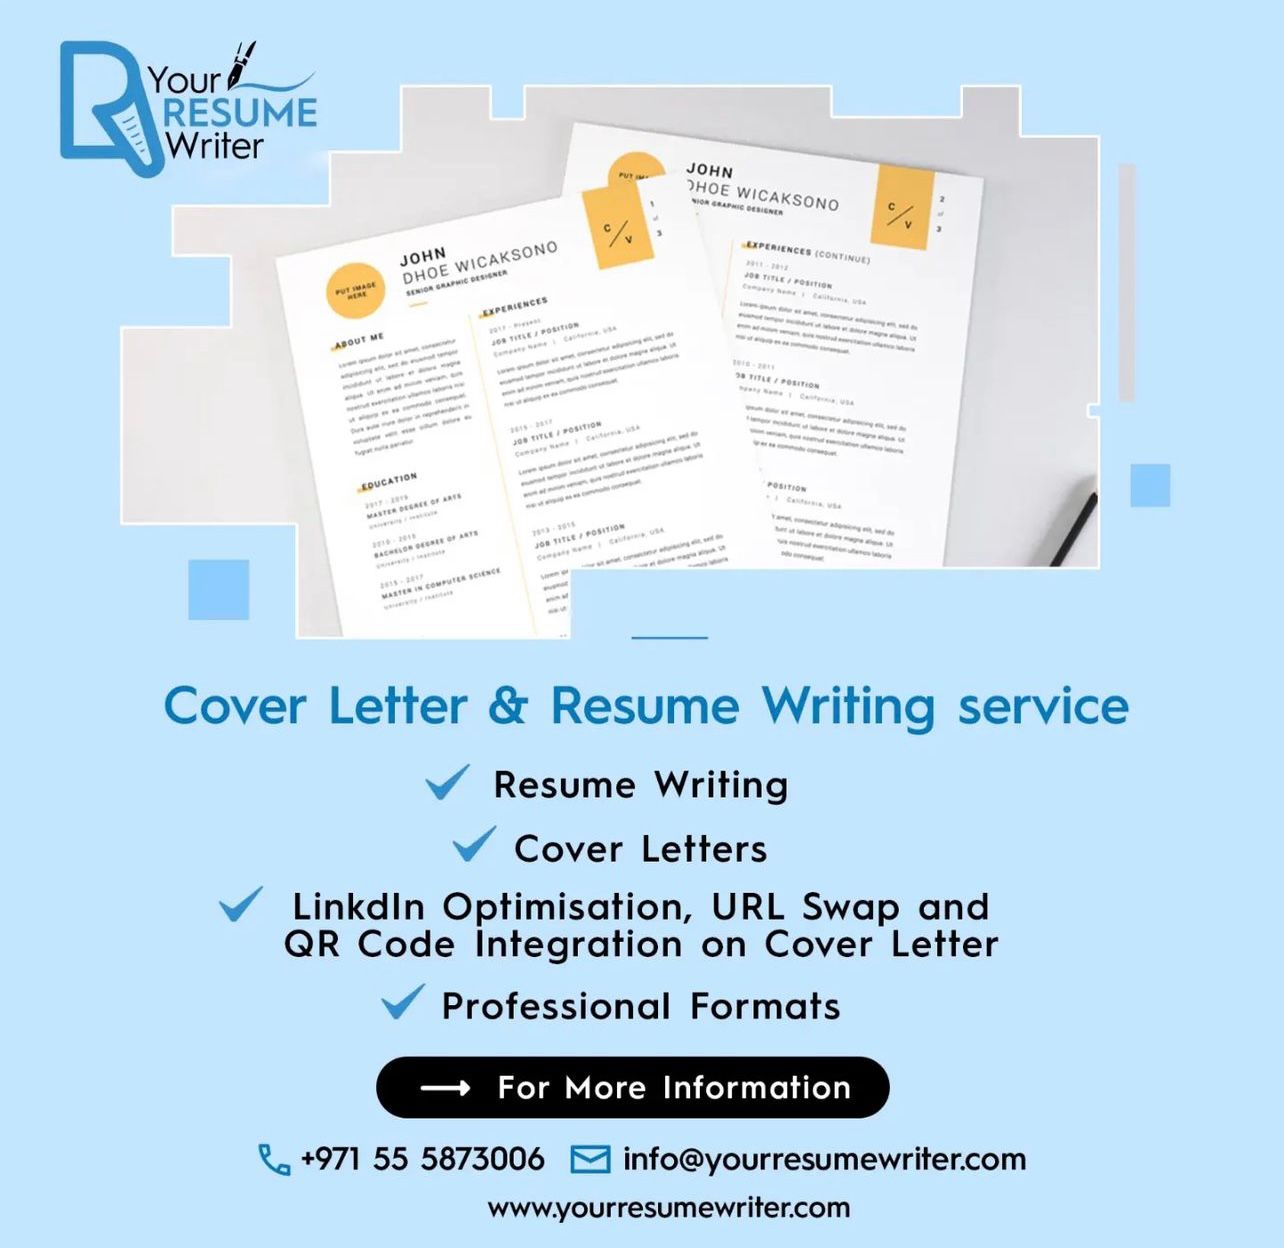 YOUR-RESUME-WRITER